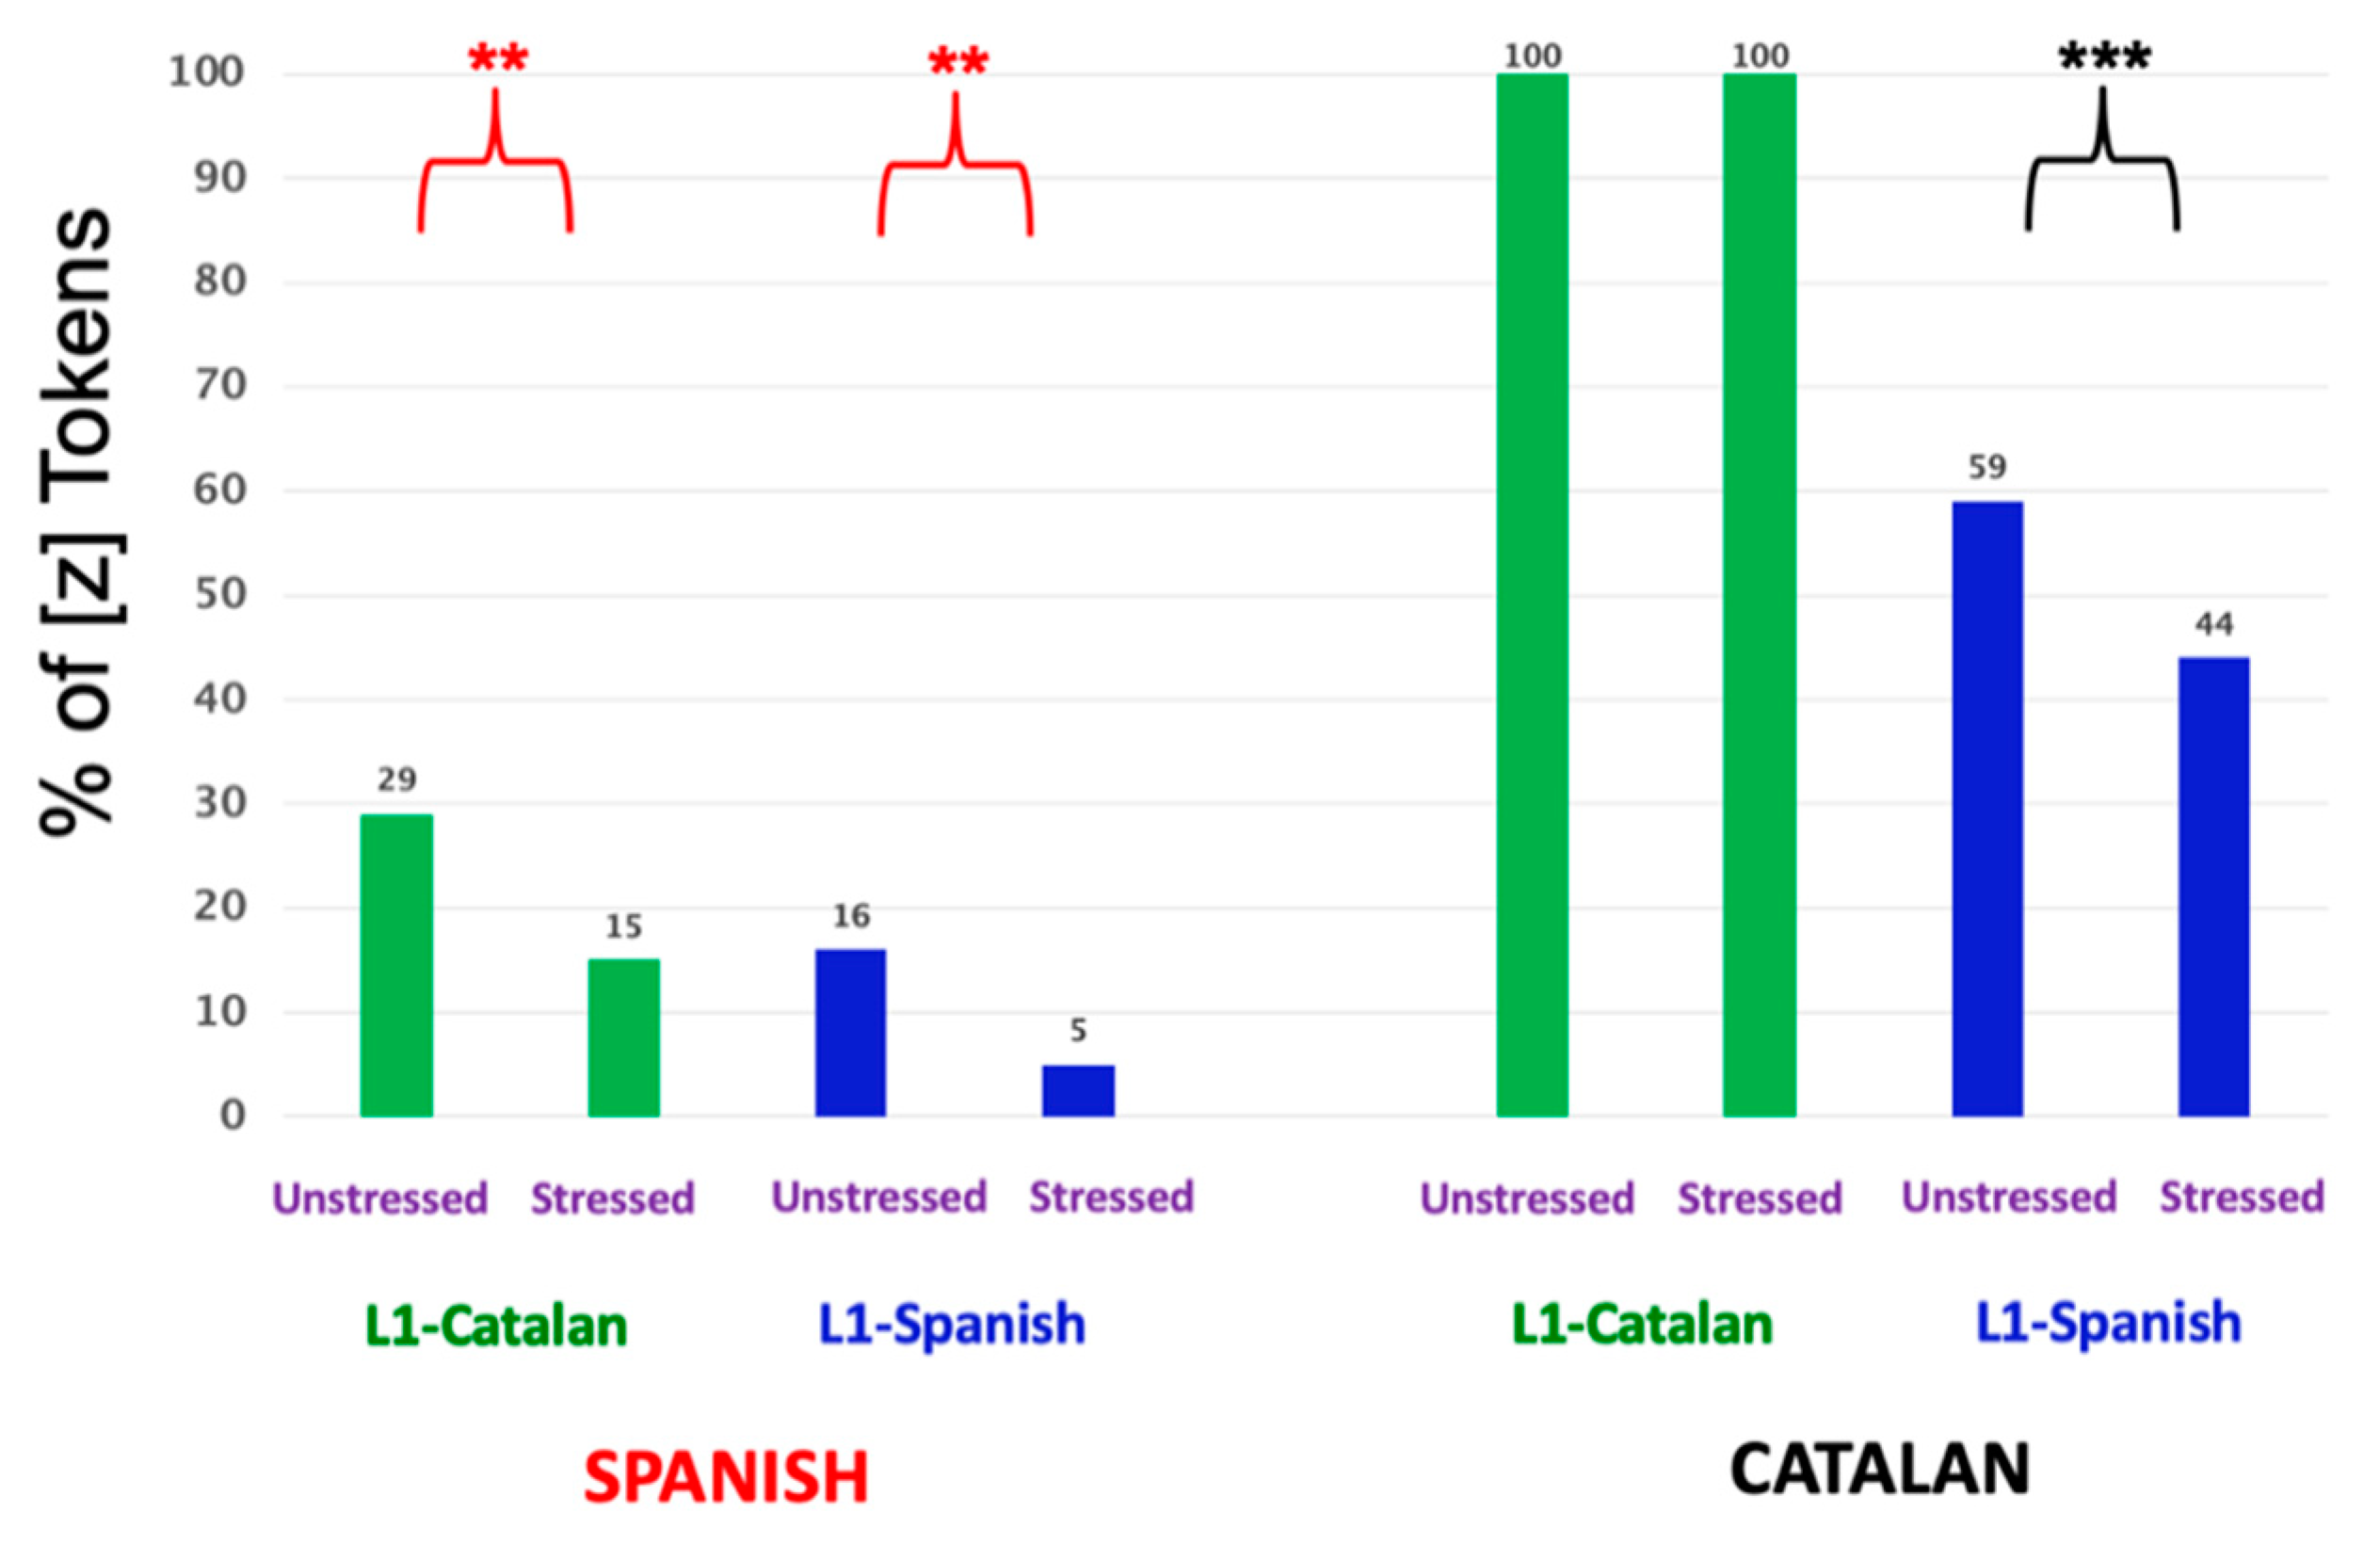 The languages in Barcelona and Catalonia